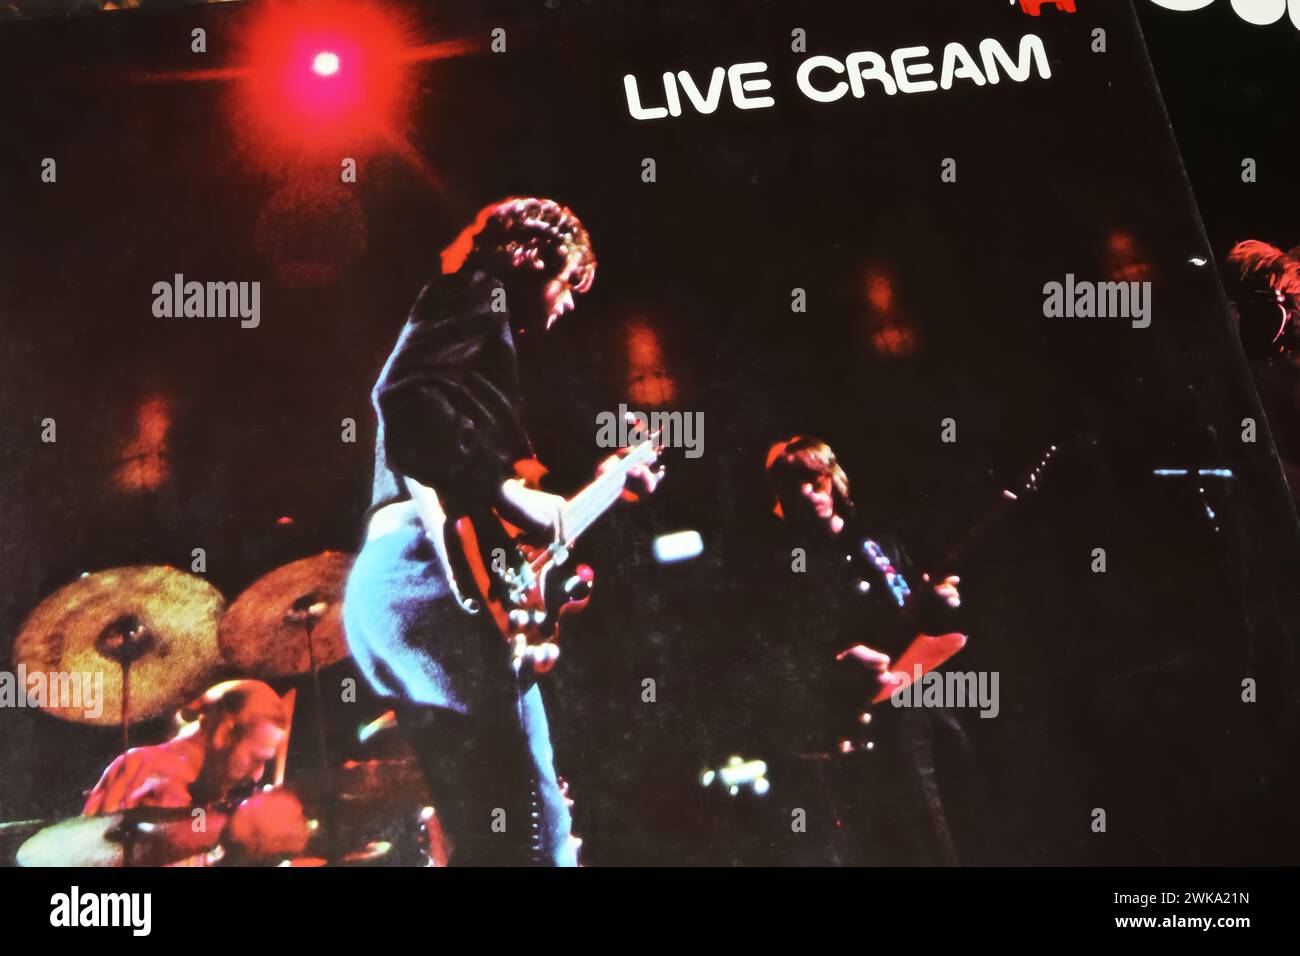 Viersen, Germany - January 9. 2024: Closeup of british rock band The Cream vinyl record Live album cover Volume 1 from 1970 Stock Photo